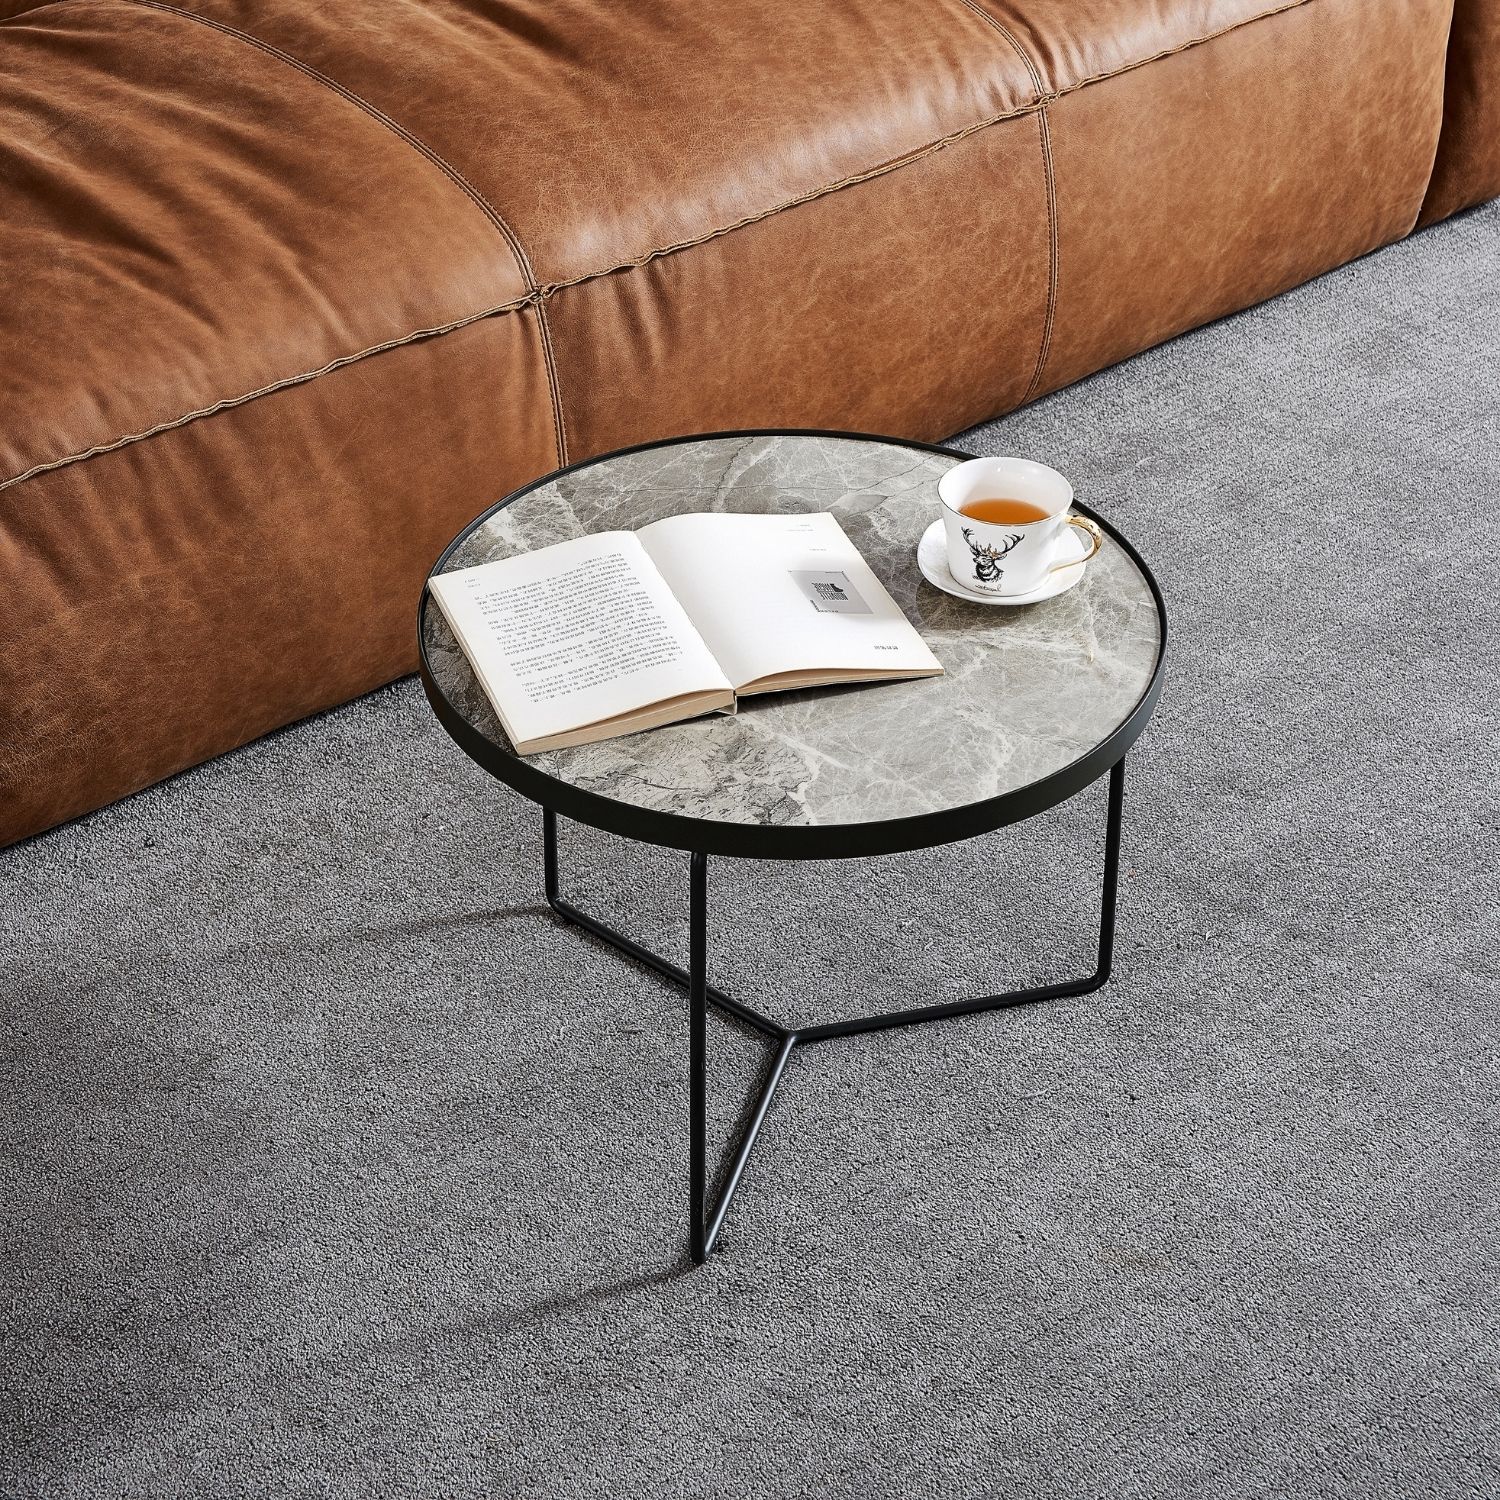 Strata Table Coffee Table Foundry 